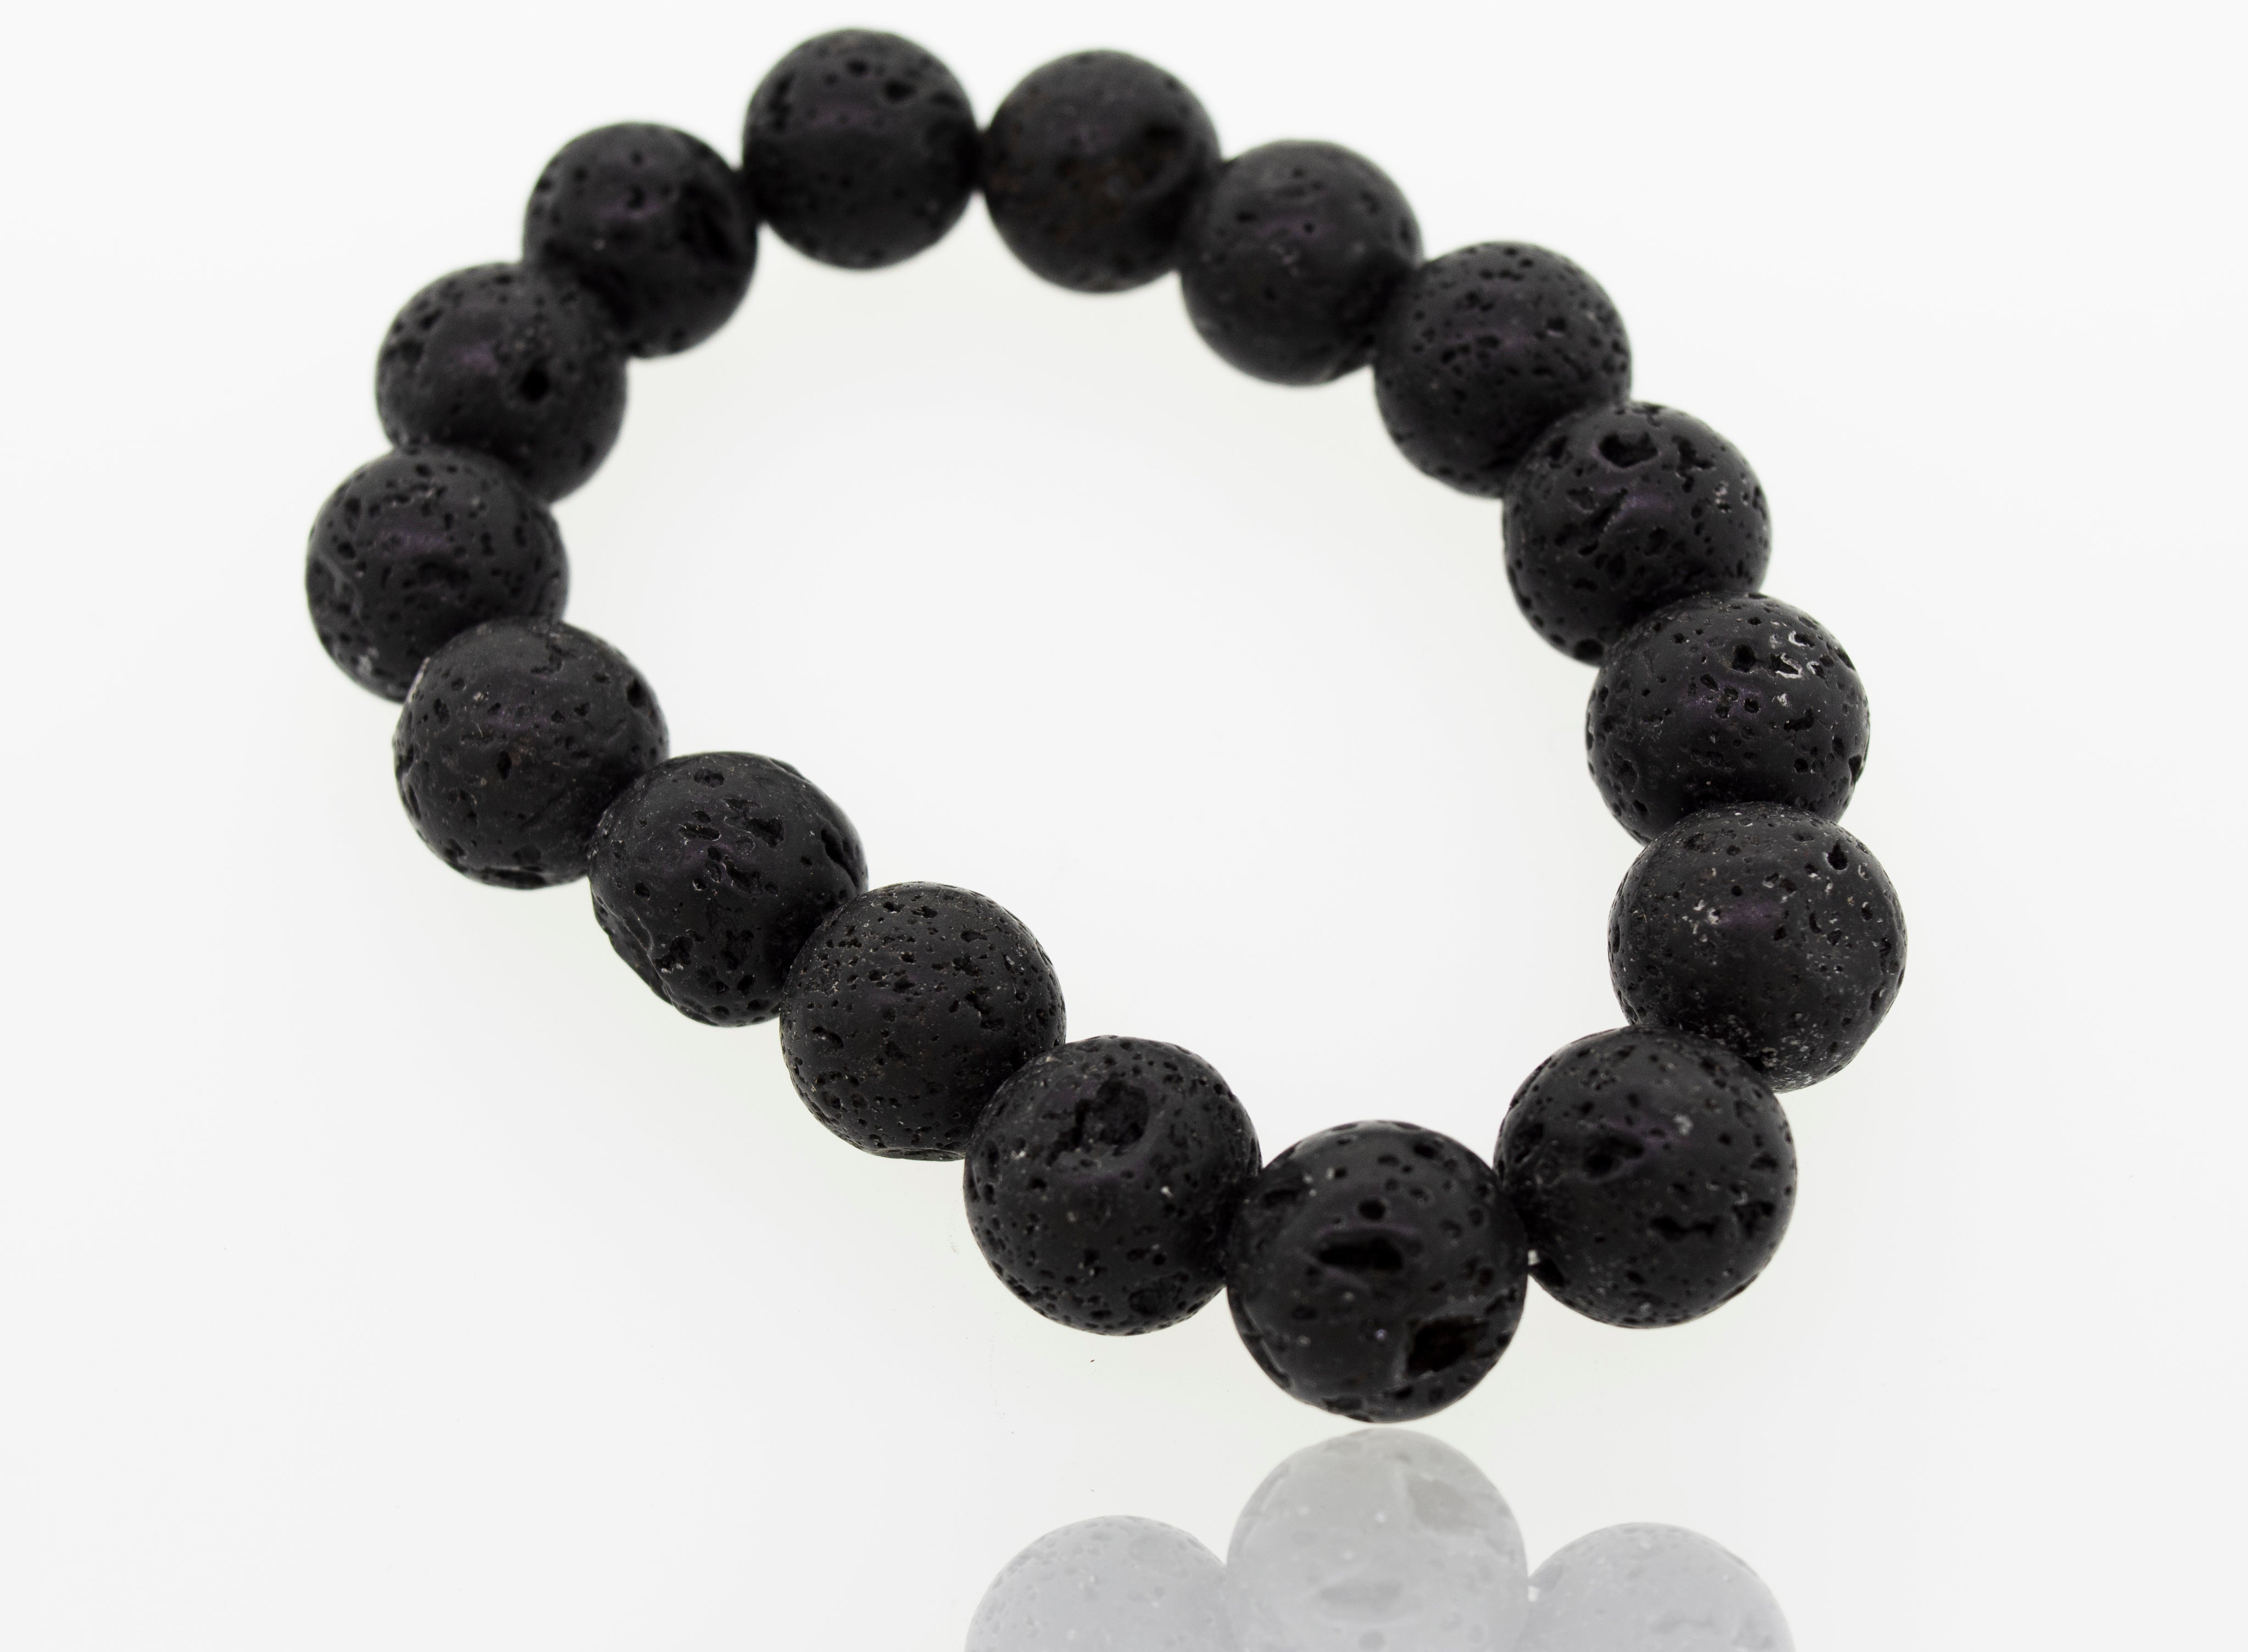 Lava Rock Beads, Beads For Essential Oils